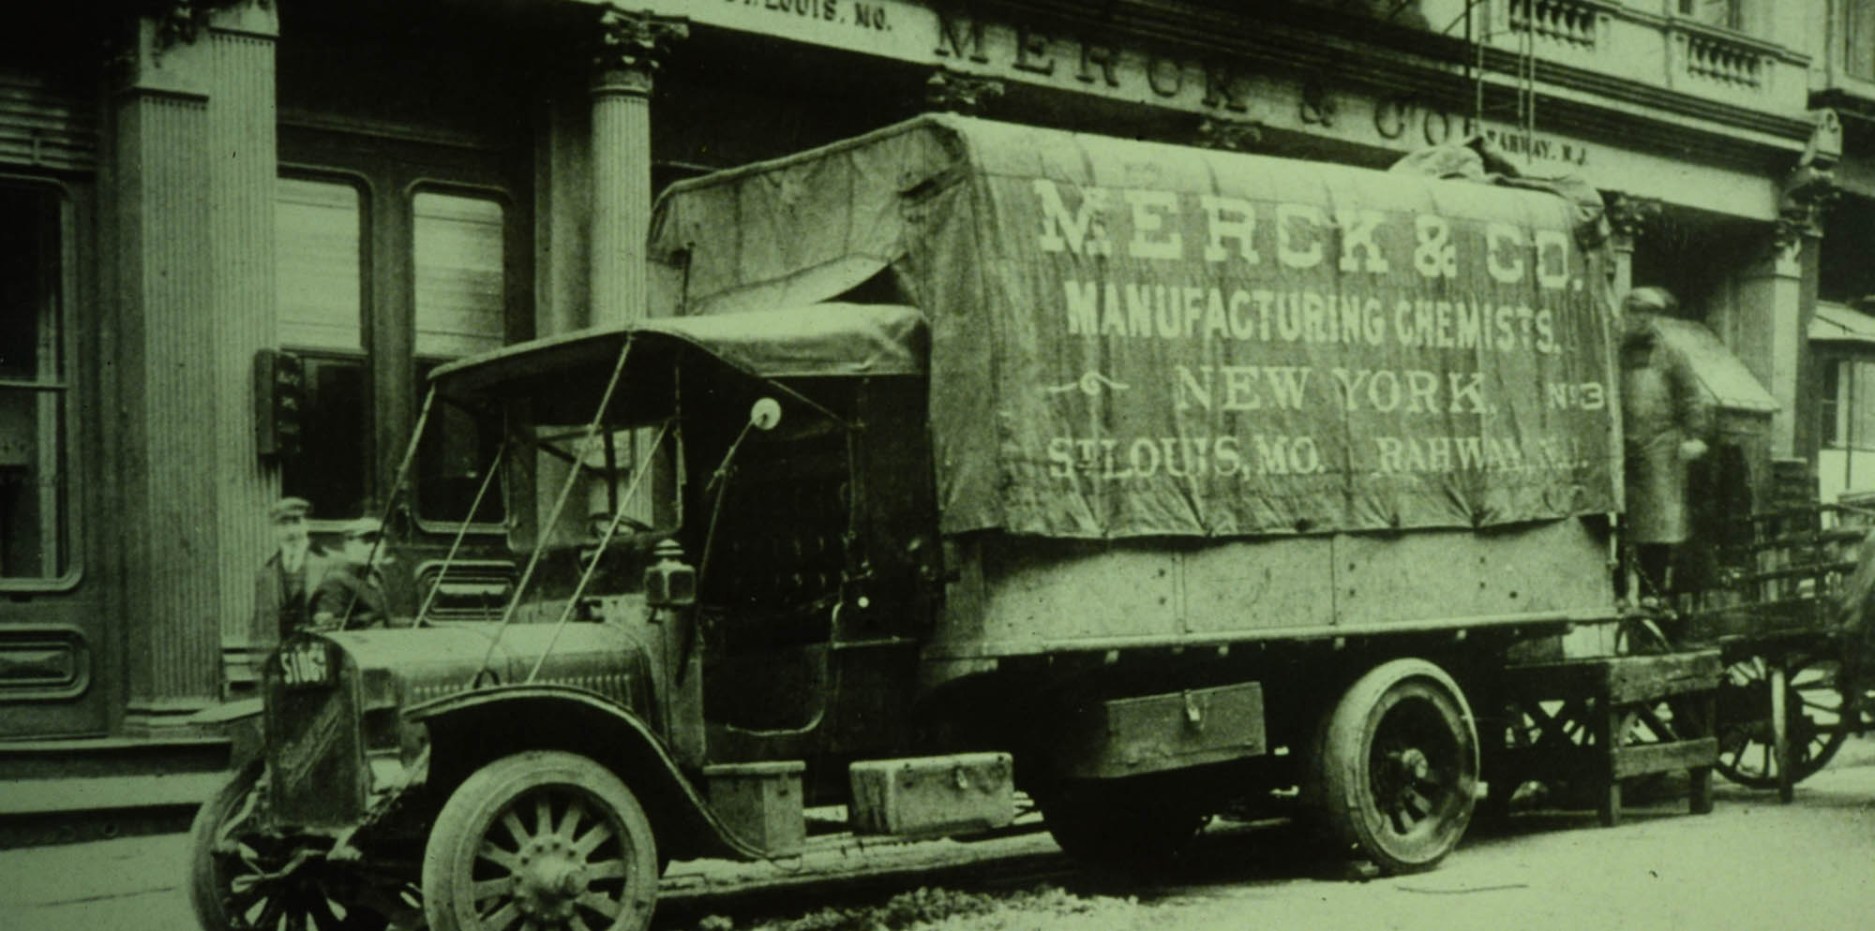 Photo: A truck of Merck & Co. founded in 1891